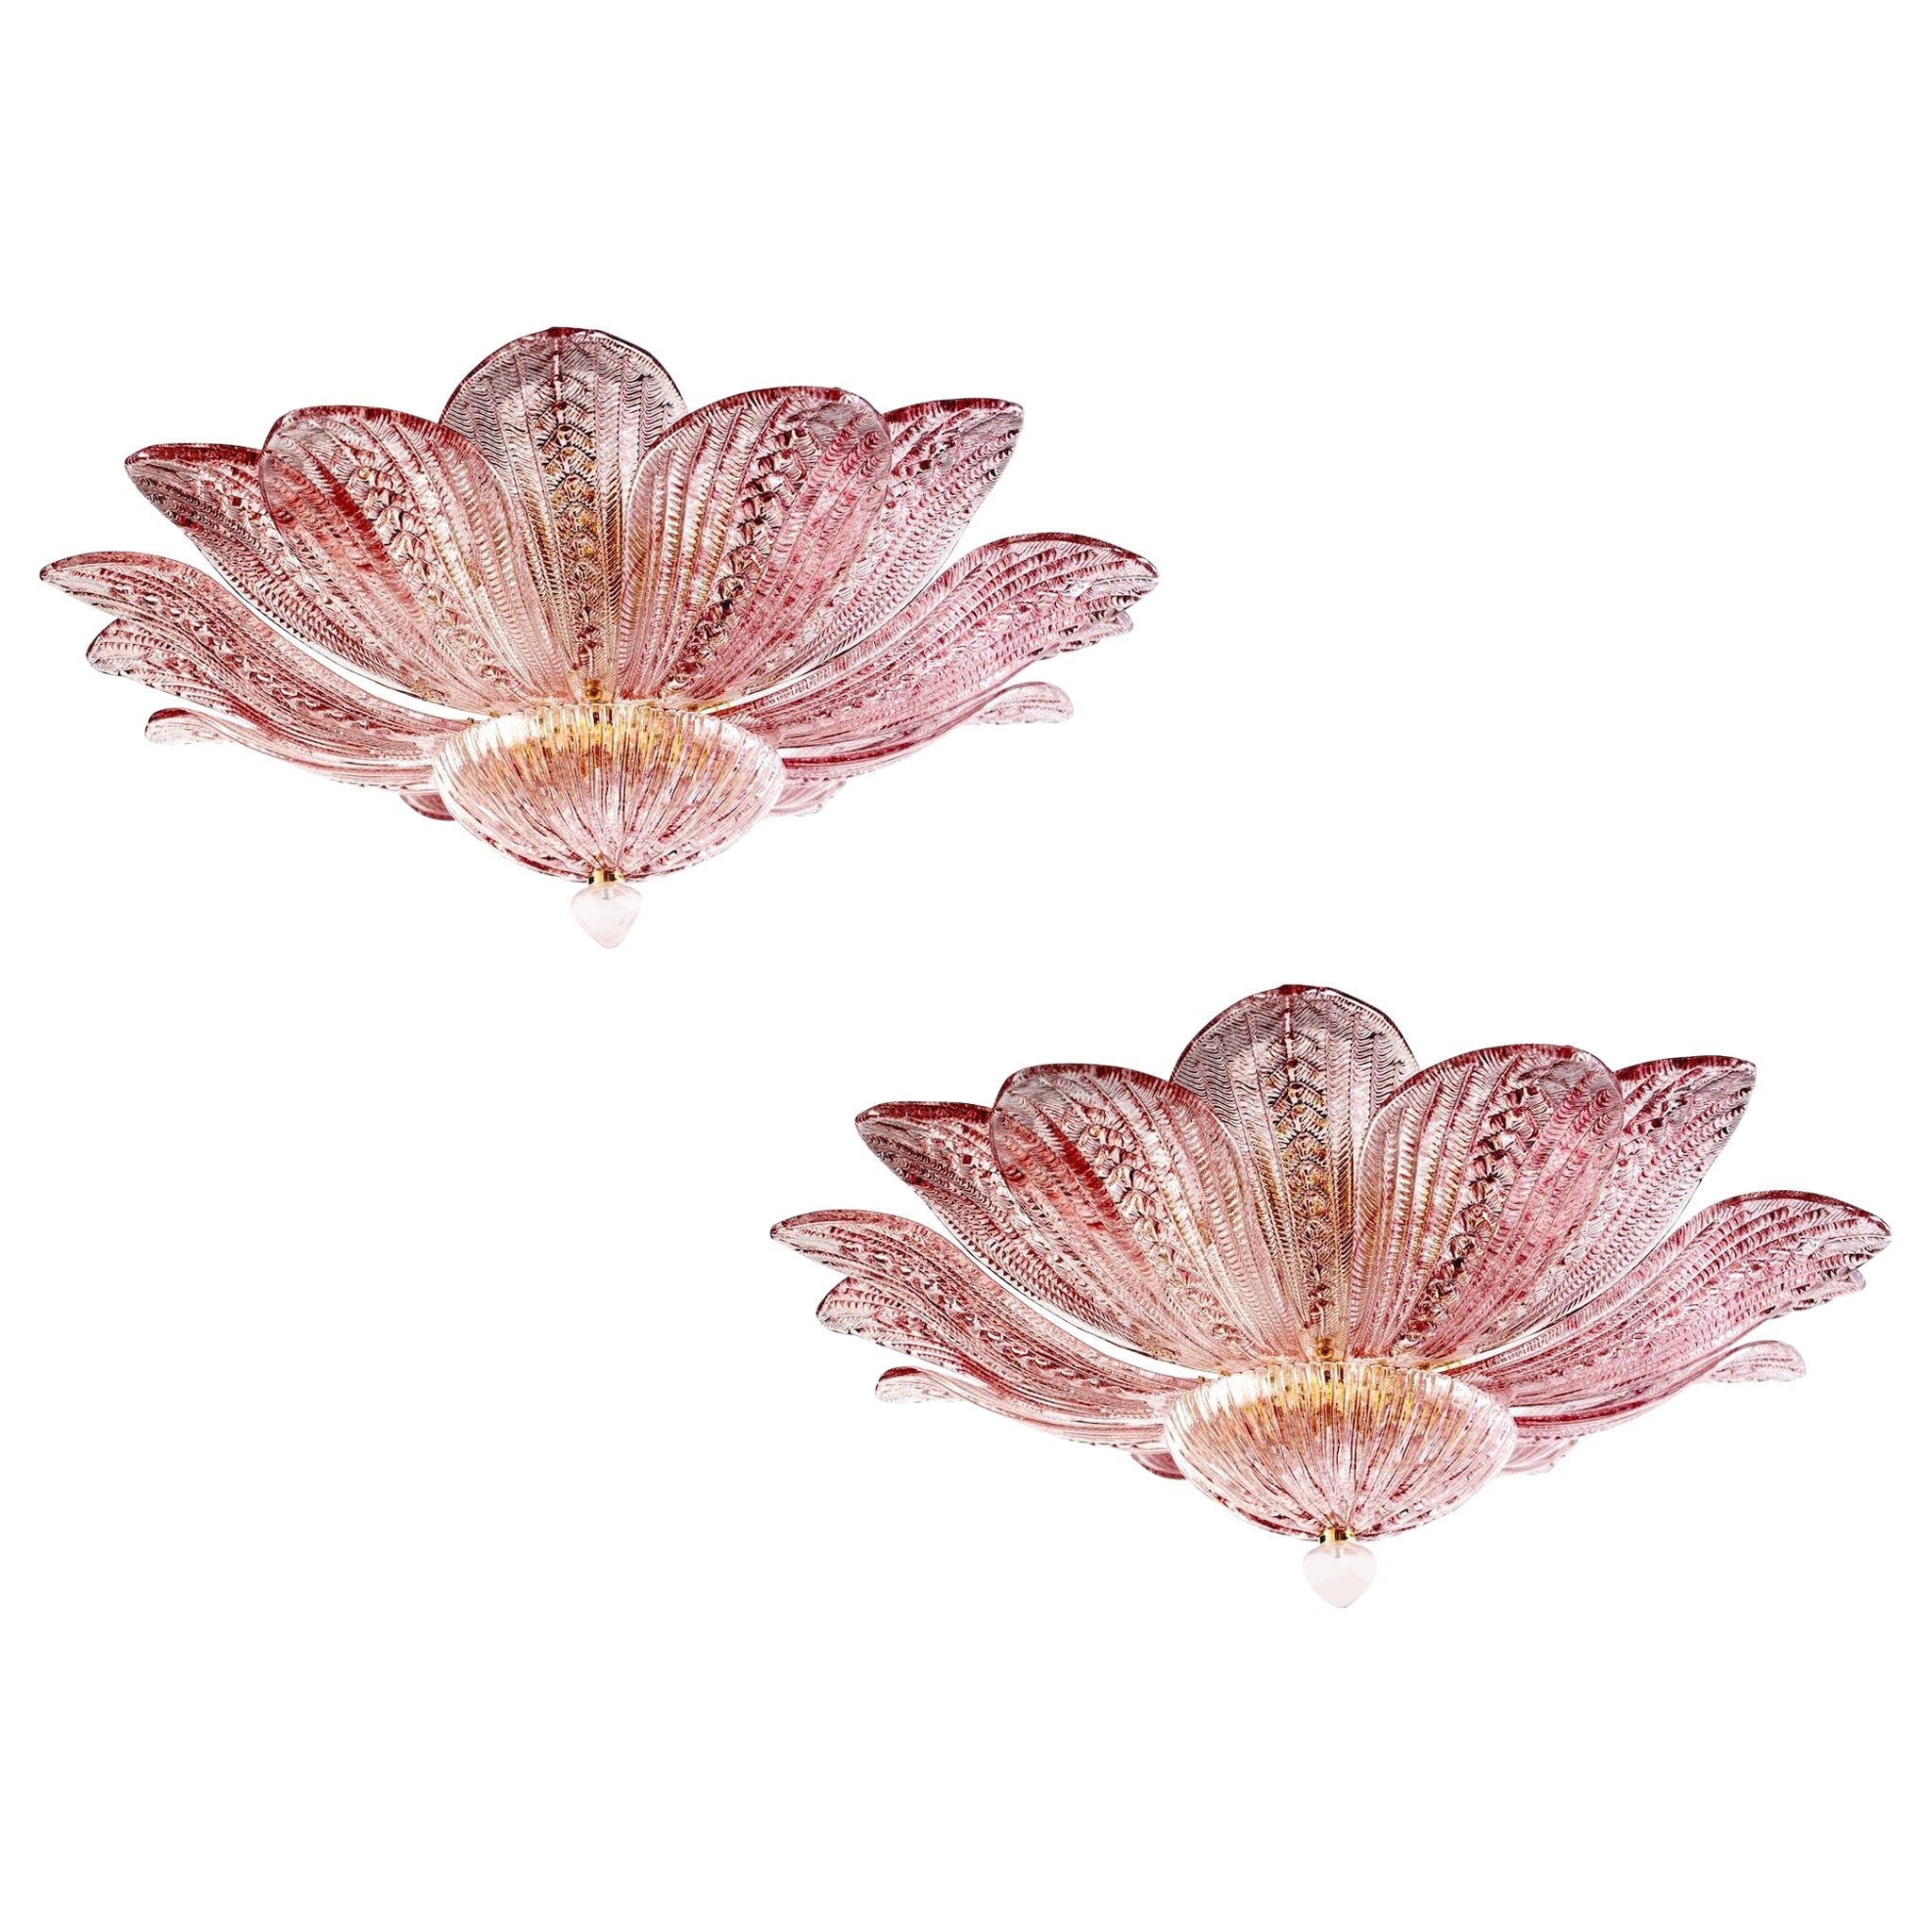  Graceful Pink Amethyst Murano Glass Leave Ceiling Light or Chandelier For Sale 5